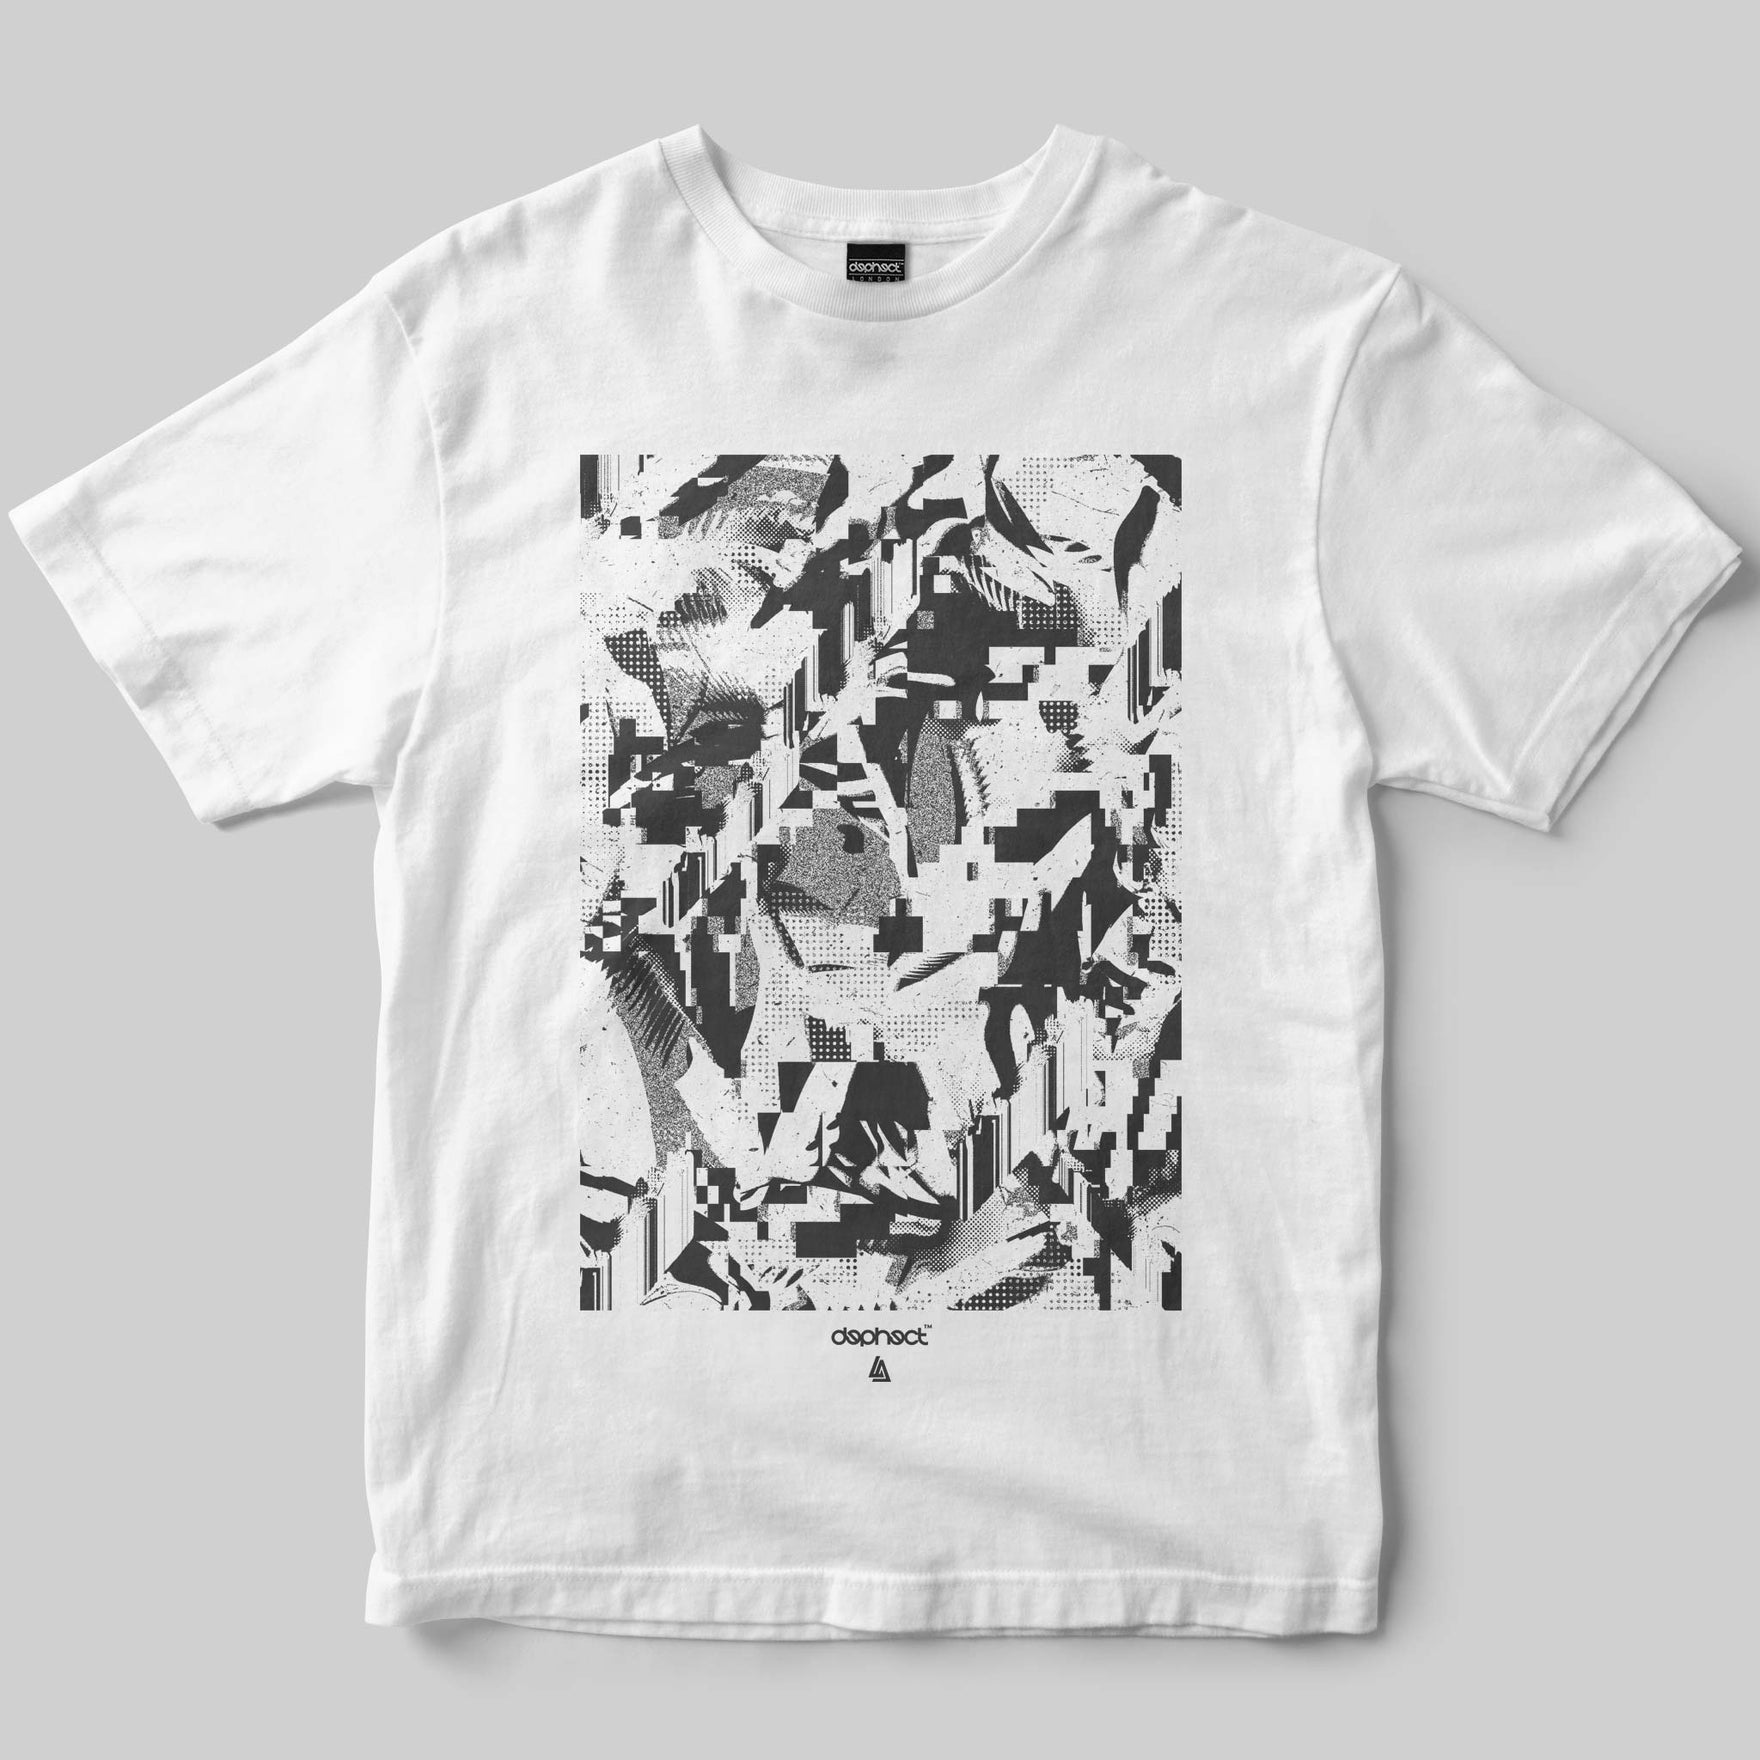 Glitch T-Shirt / White / by Robert Anderson